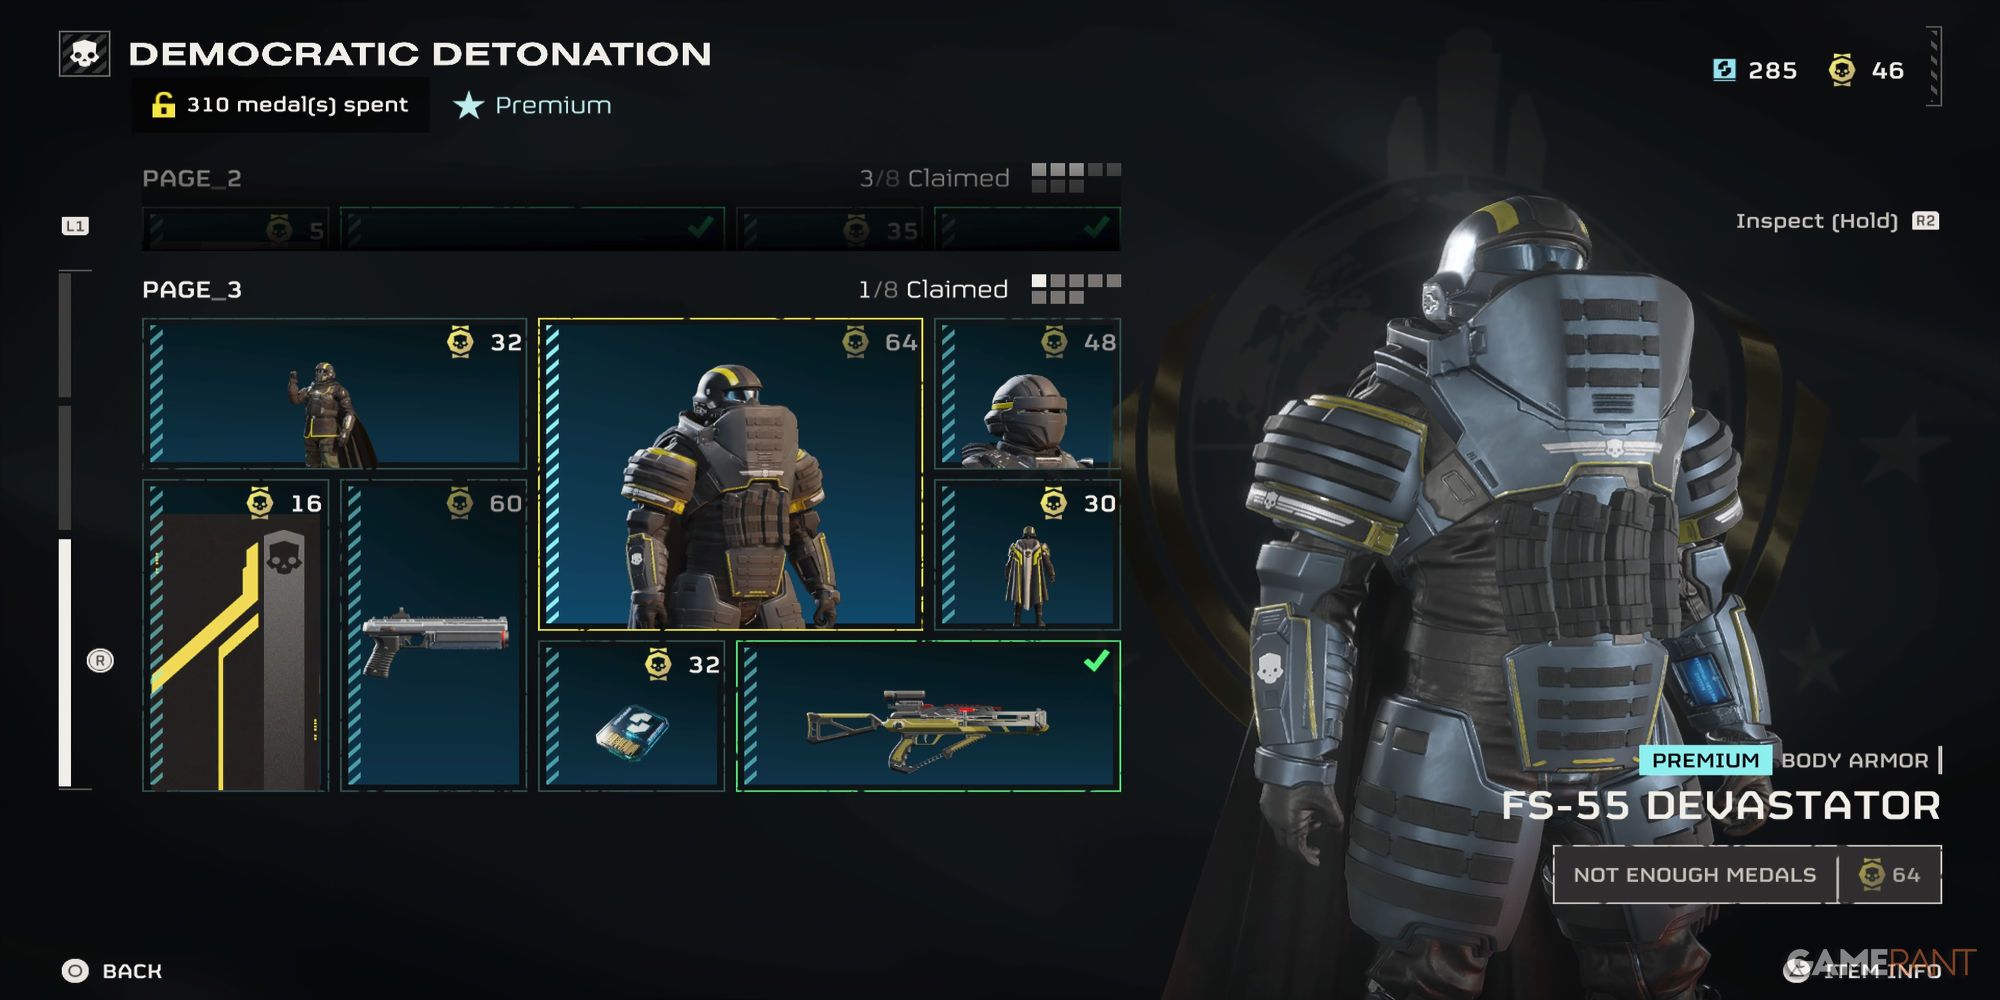 The heavy armor from the Democratic Detonation Warbond